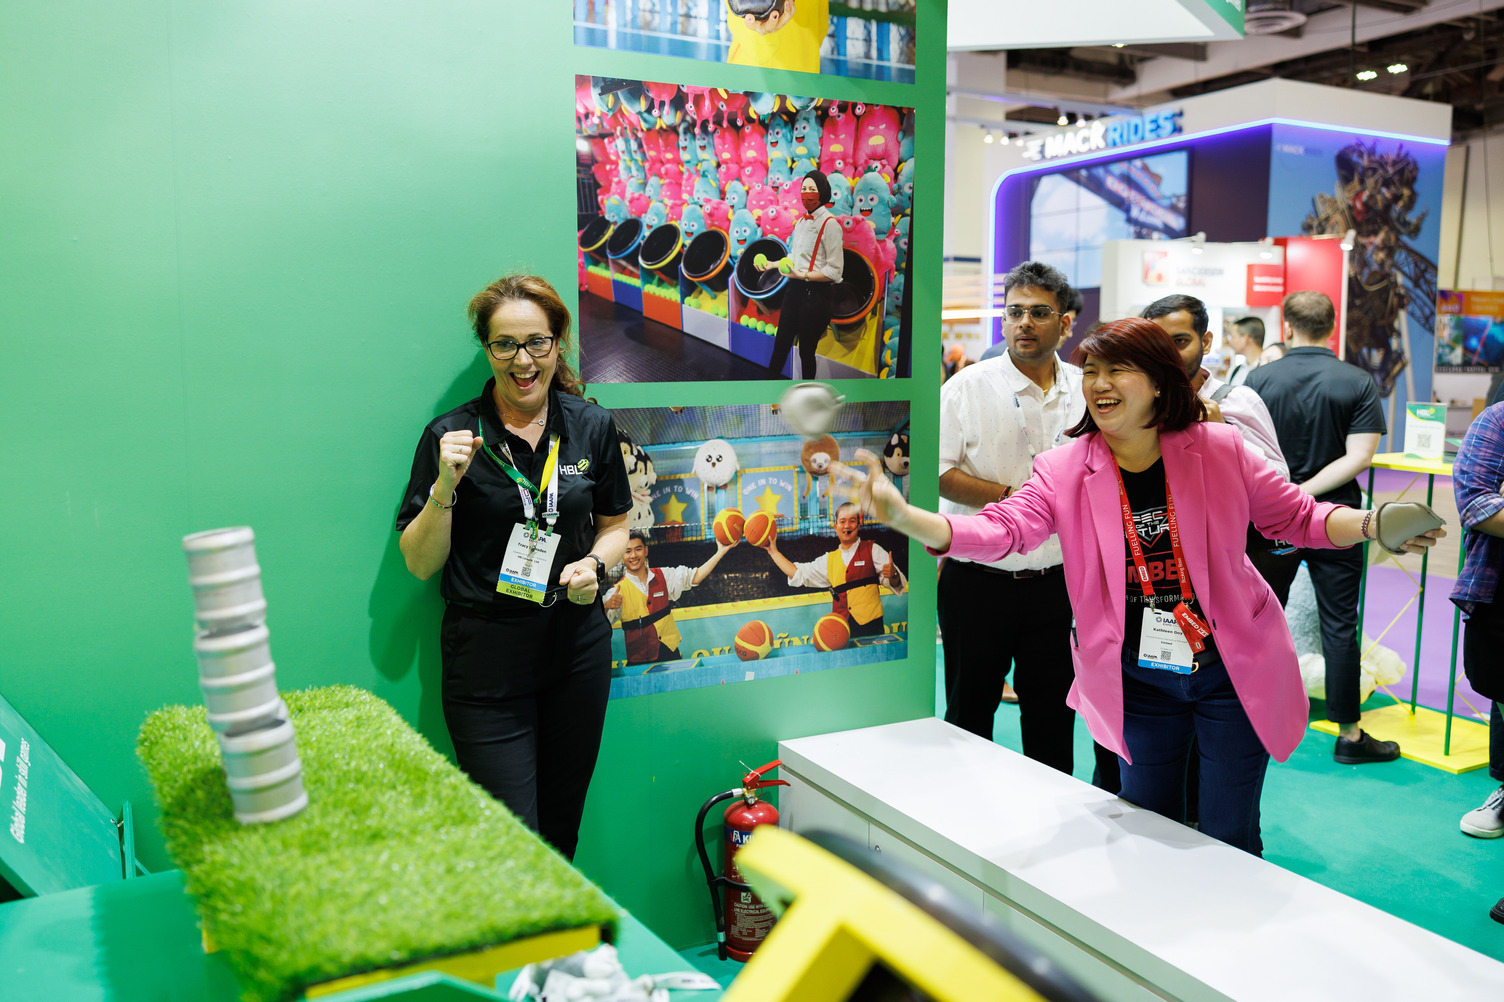 Attendees enjoying a game in a booth